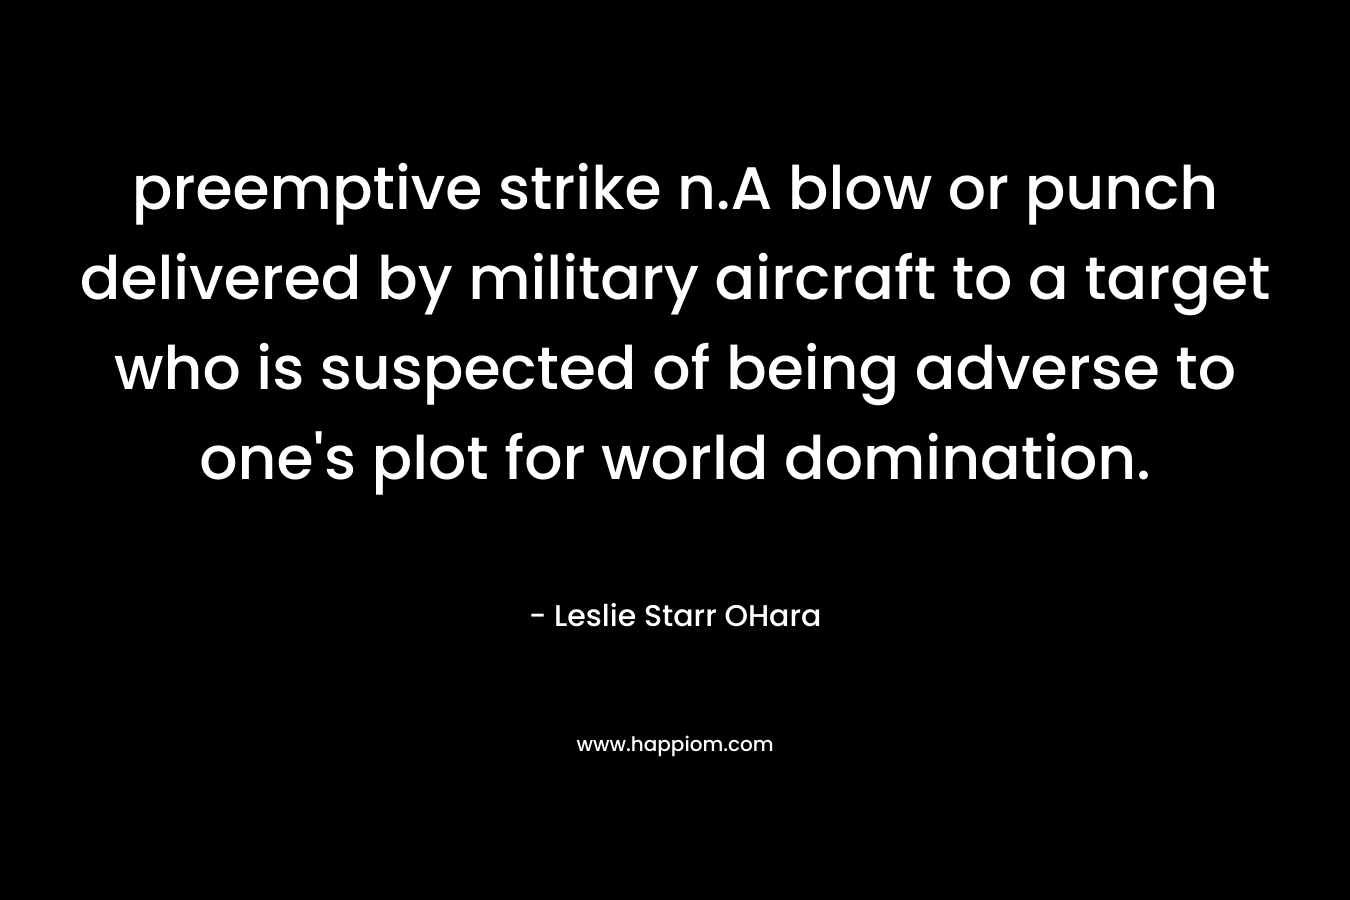 preemptive strike n.A blow or punch delivered by military aircraft to a target who is suspected of being adverse to one’s plot for world domination. – Leslie Starr OHara